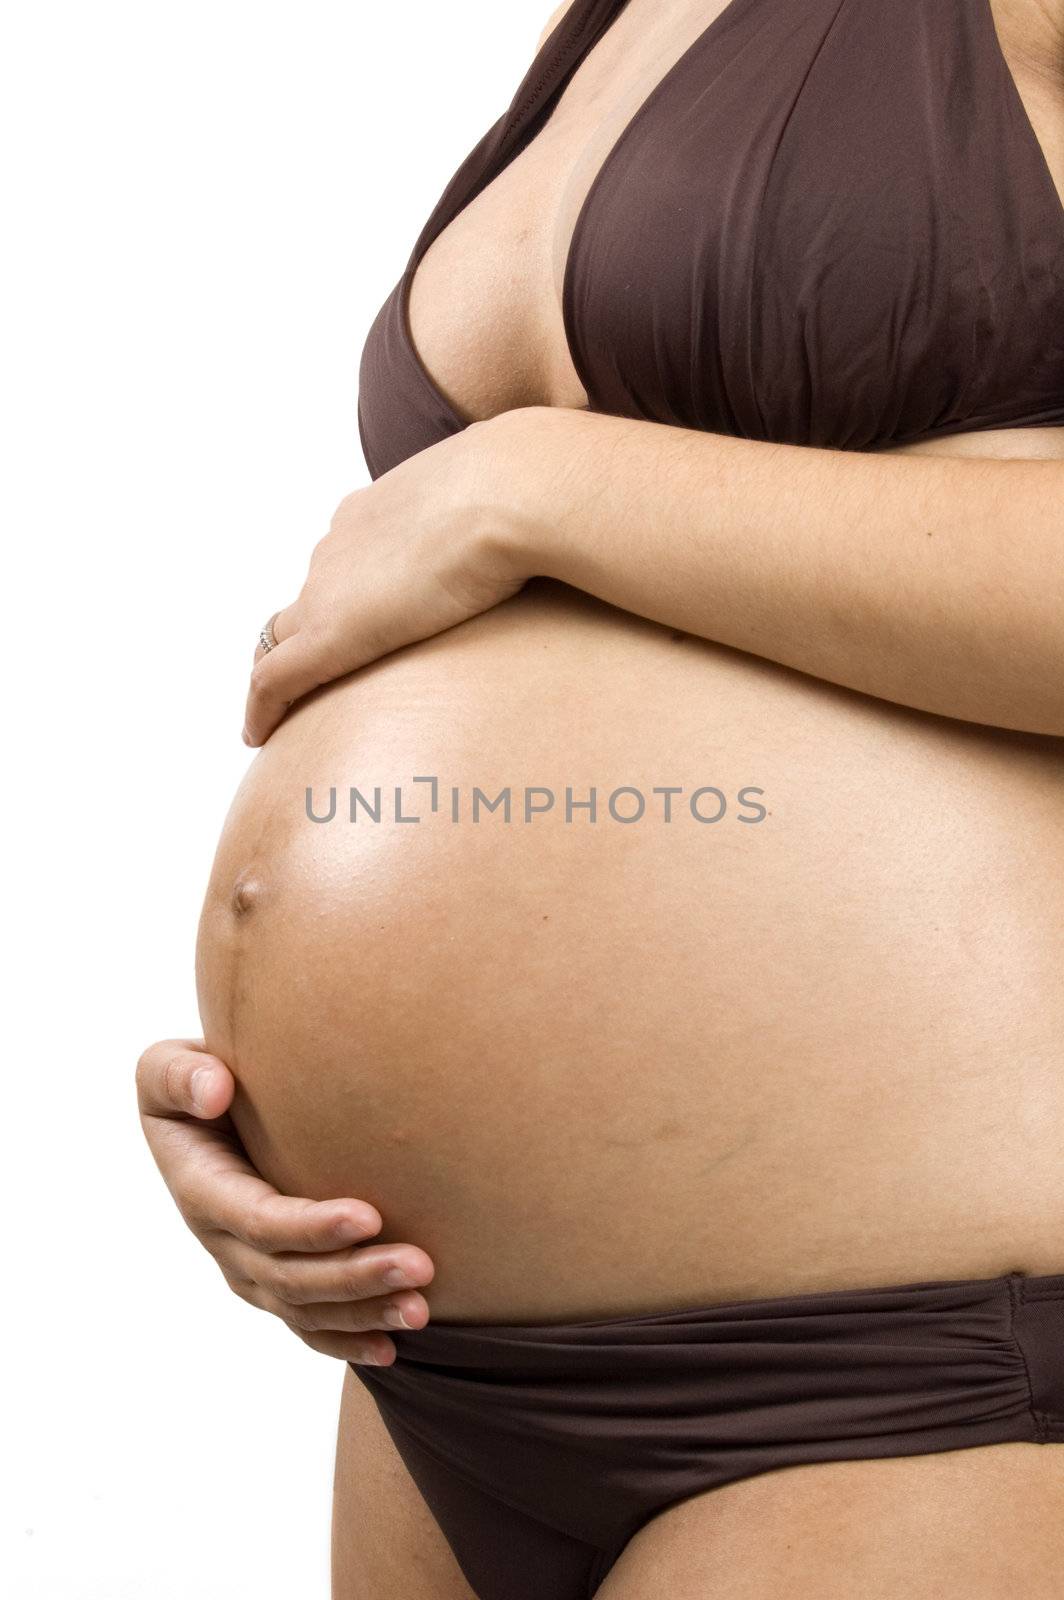 30 weeks pregnant teenager holding her belly by ladyminnie